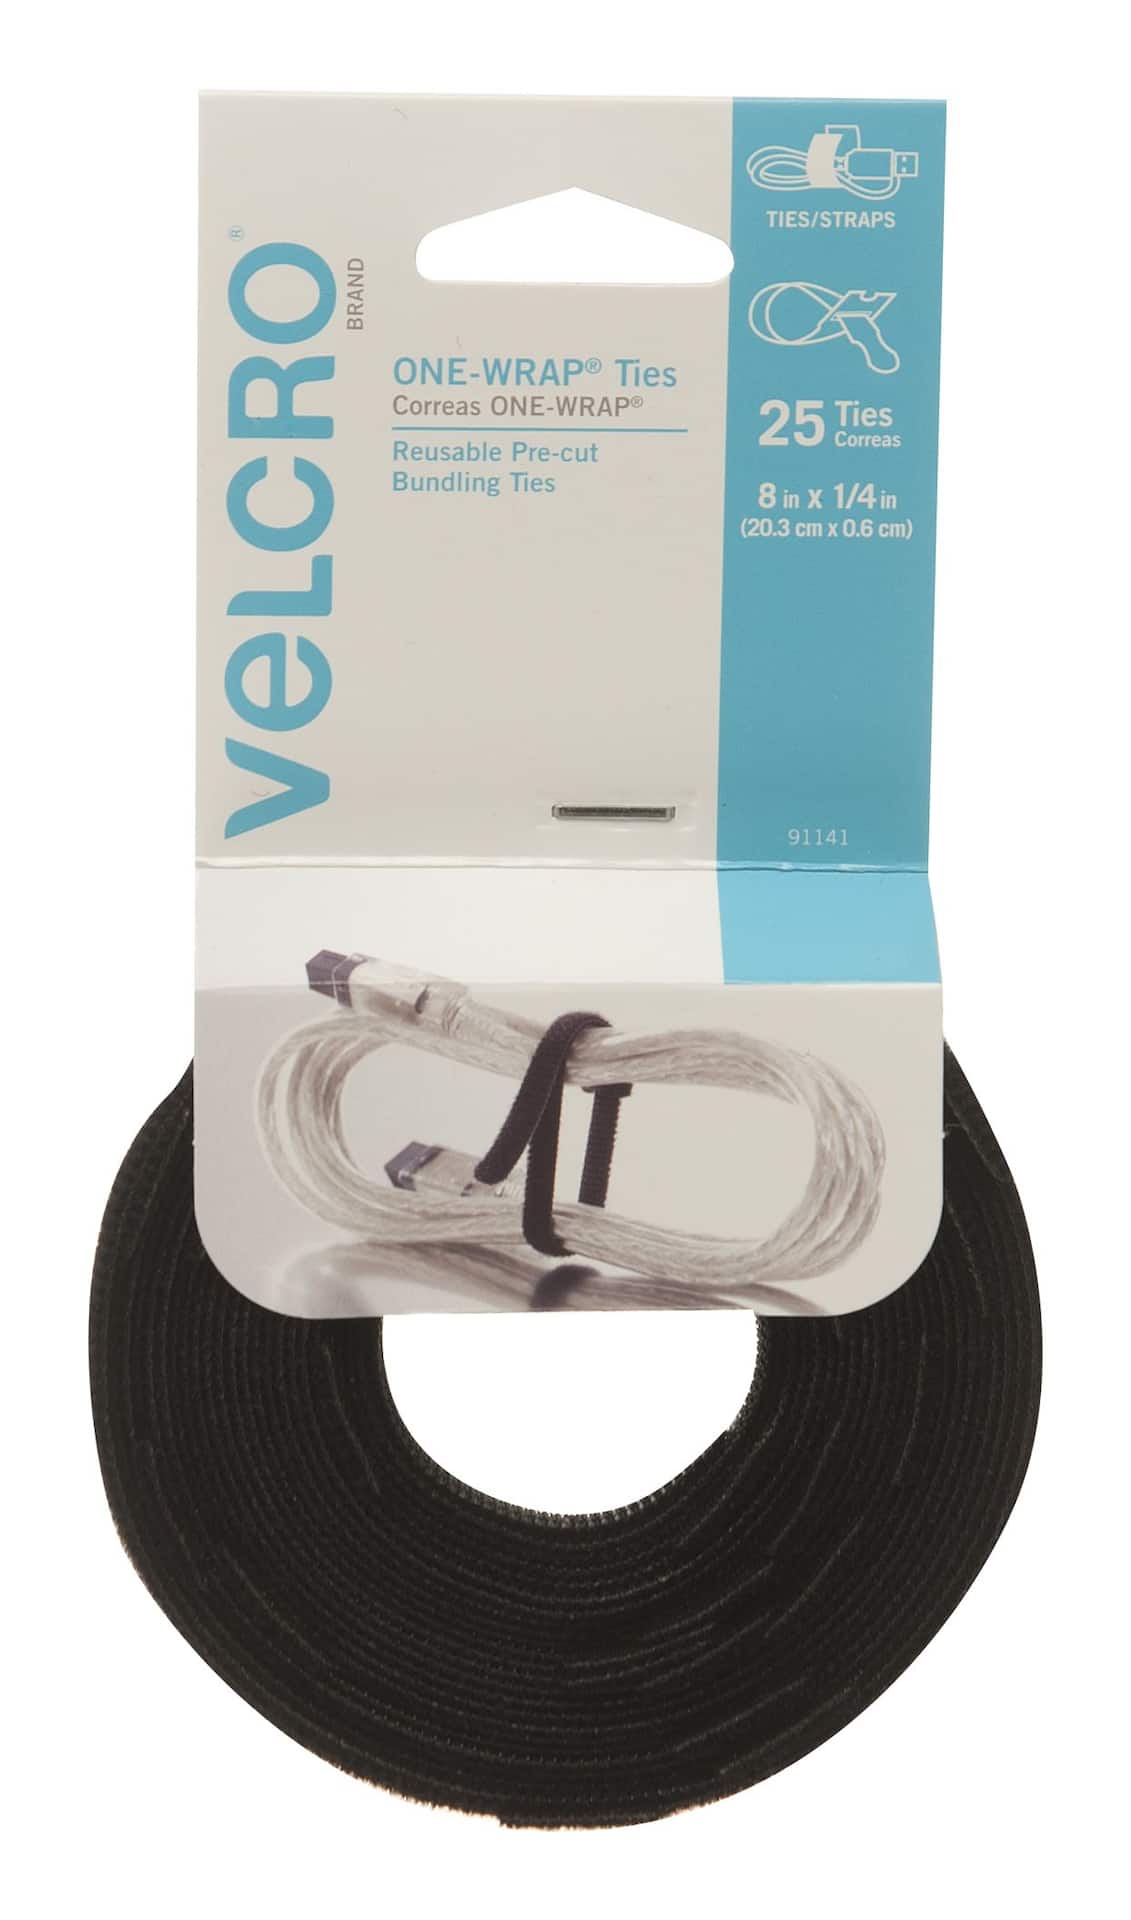 Velcro Adjustable Reusable All-Purpose Nylon Strap with Handle